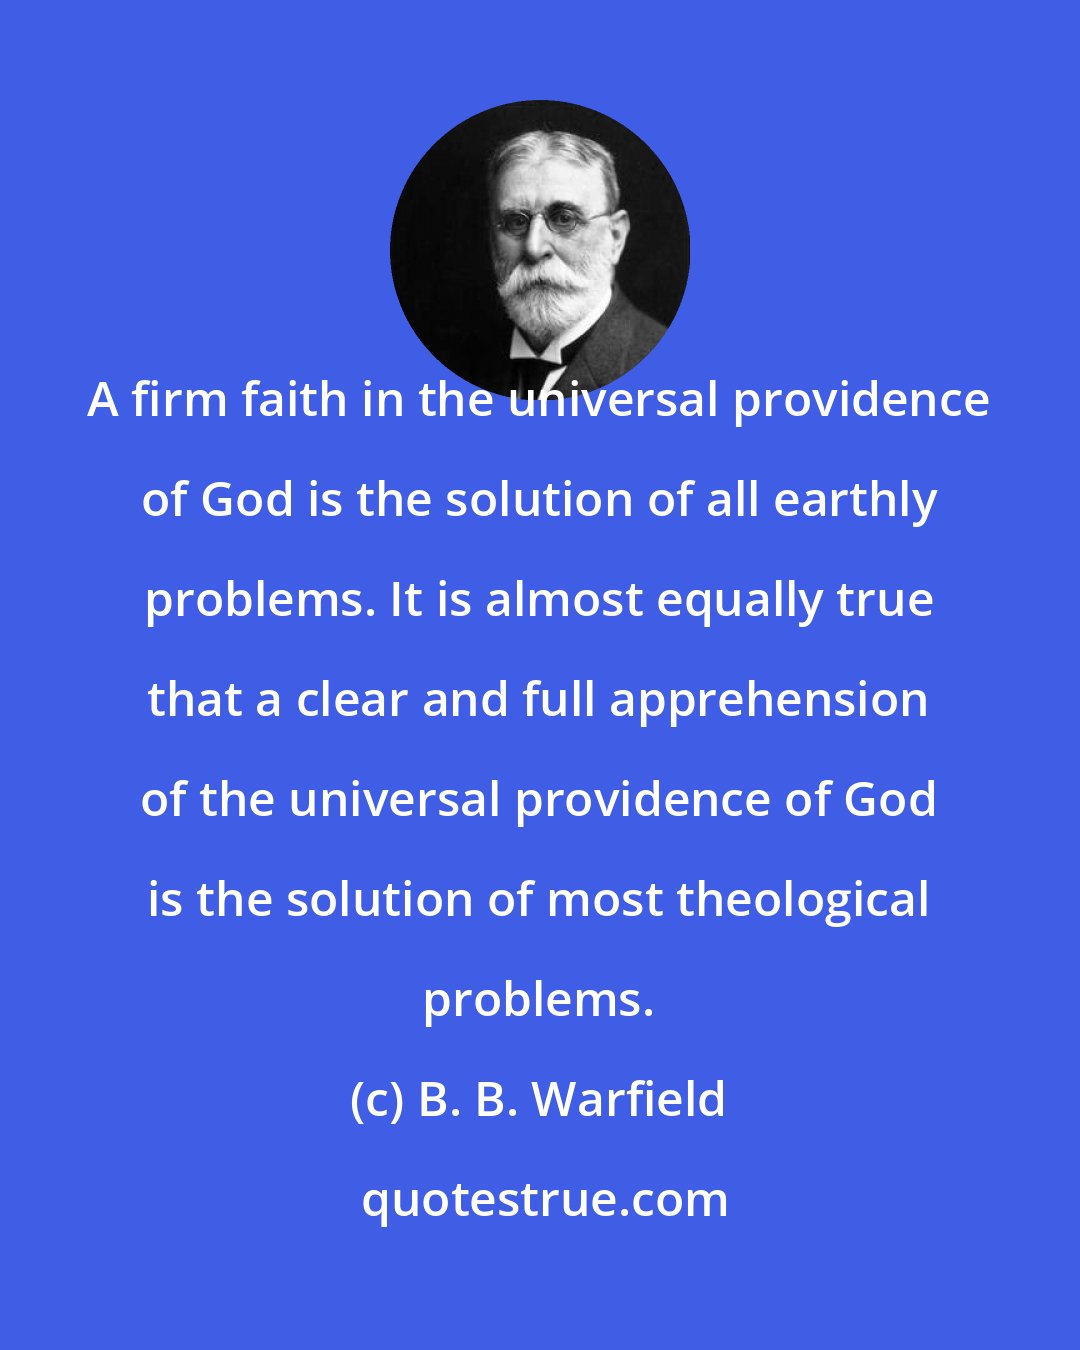 B. B. Warfield: A firm faith in the universal providence of God is the solution of all earthly problems. It is almost equally true that a clear and full apprehension of the universal providence of God is the solution of most theological problems.